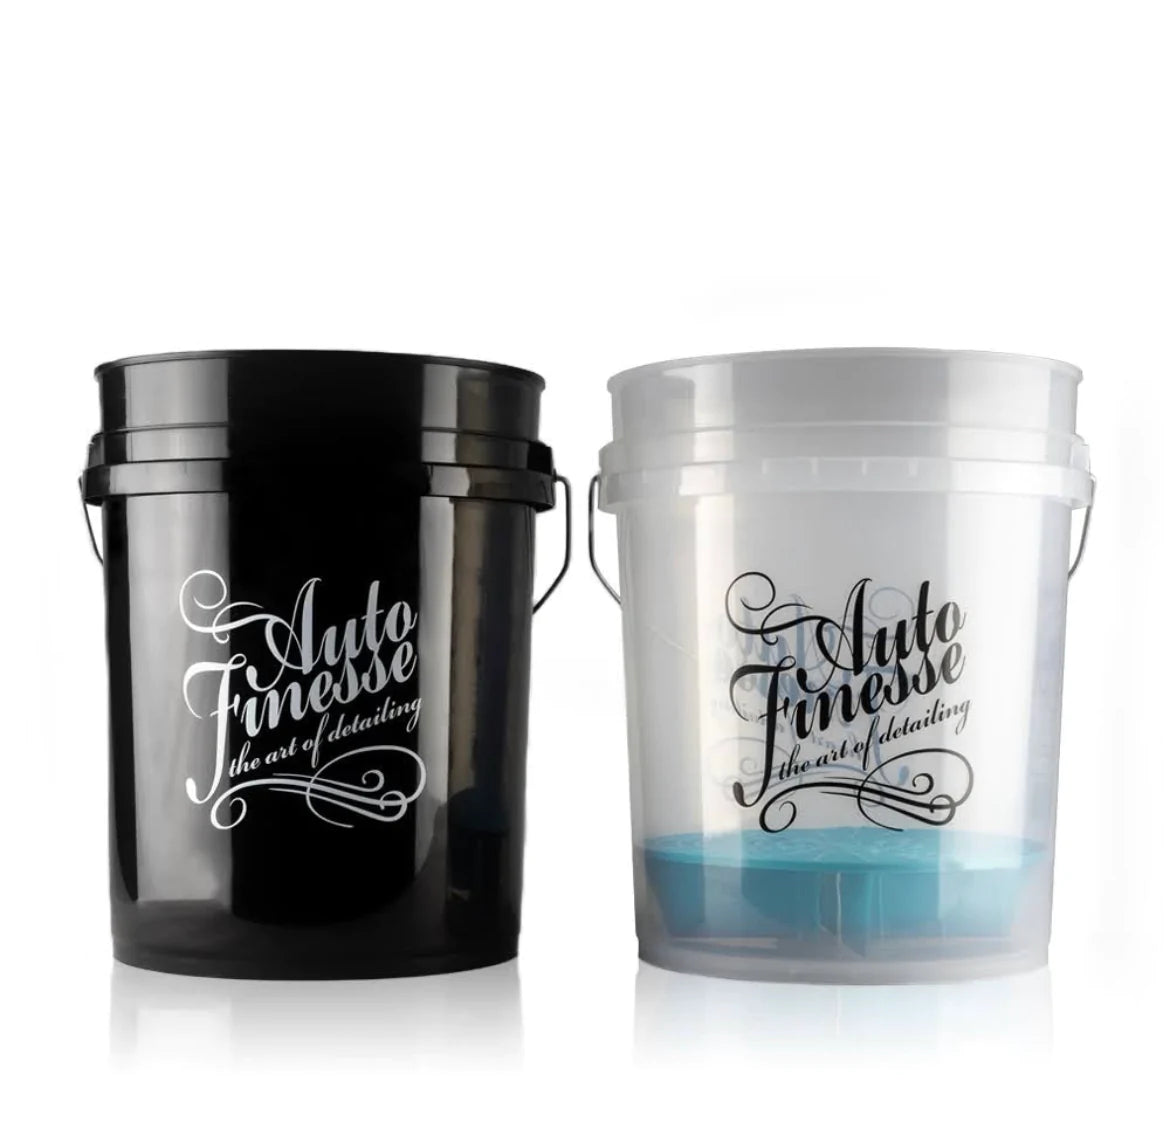 Auto Finesse - Detailing Bucket with Grit Guard